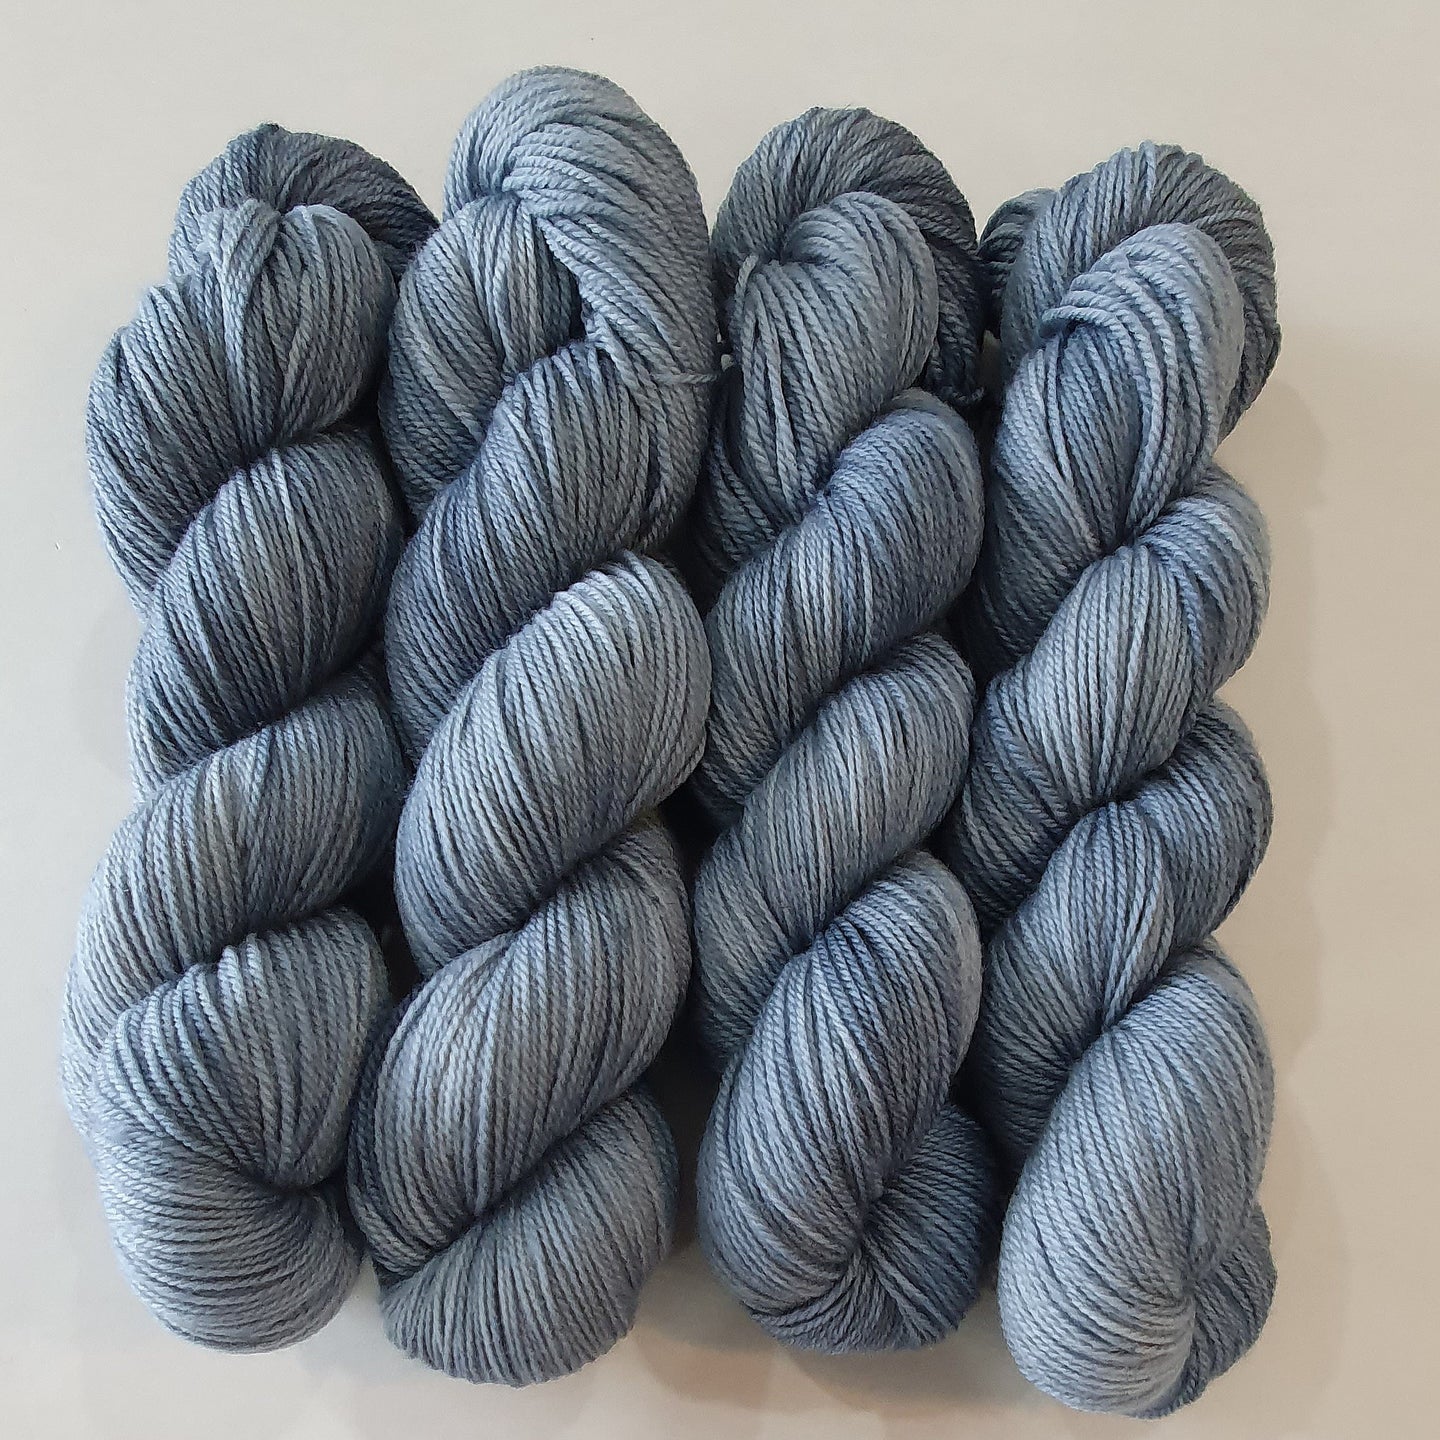 Stormy Weather (Fledgling 4ply Sock)